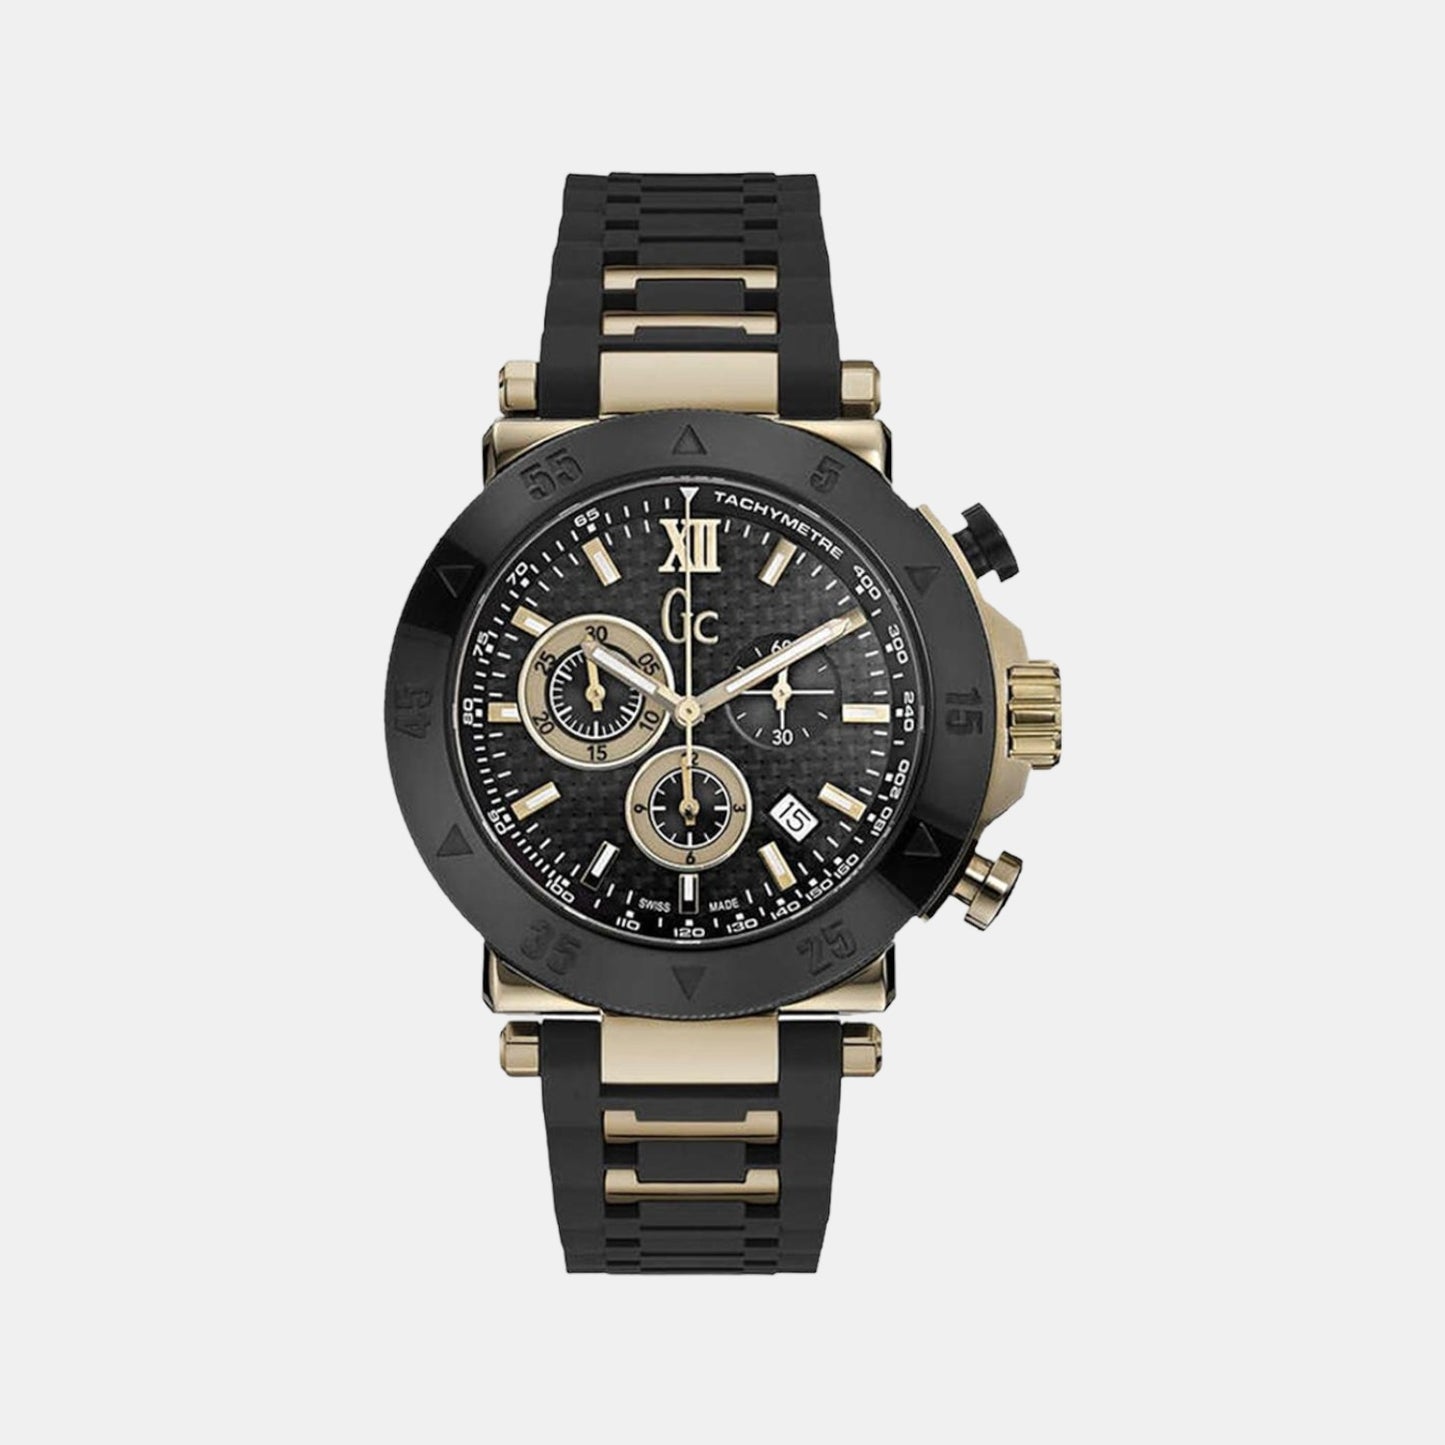 Male Black Silicon Chronograph Watch X90021G2S